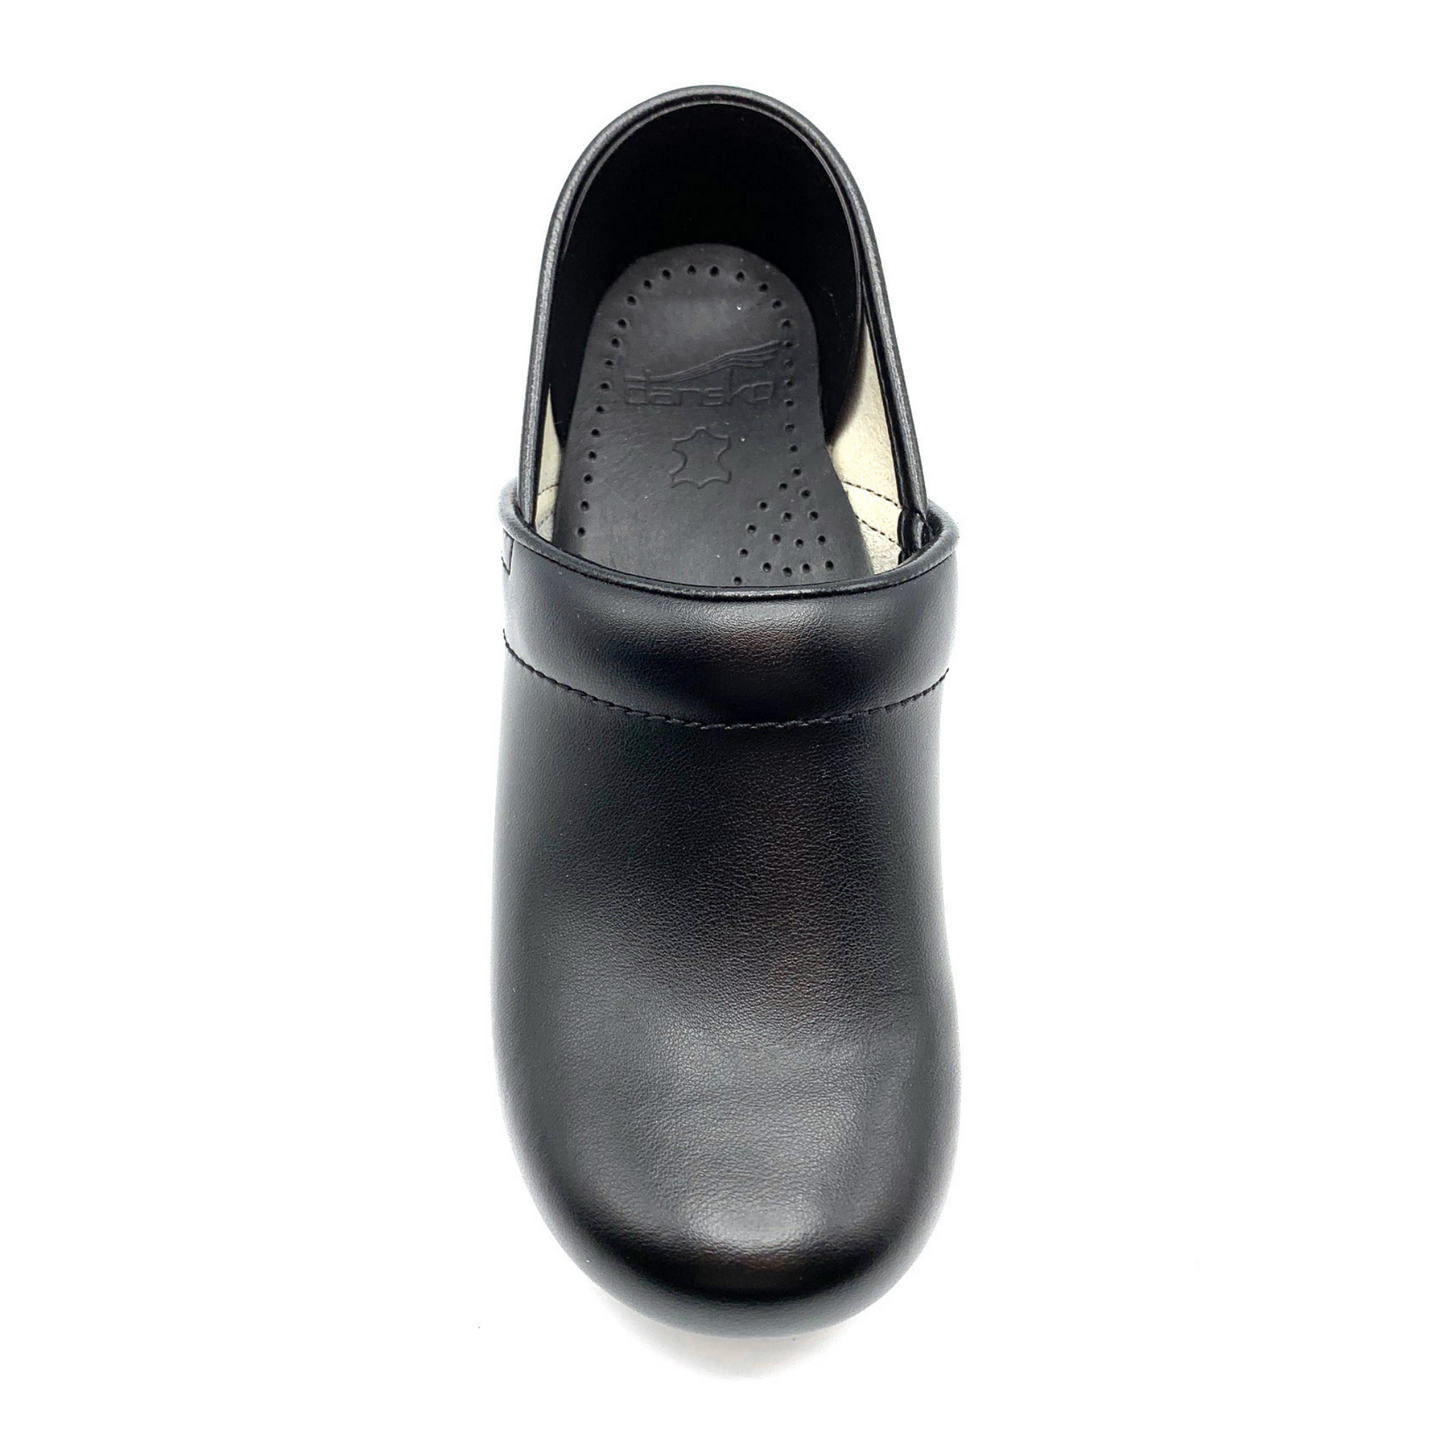 A top view of a black leather clog.